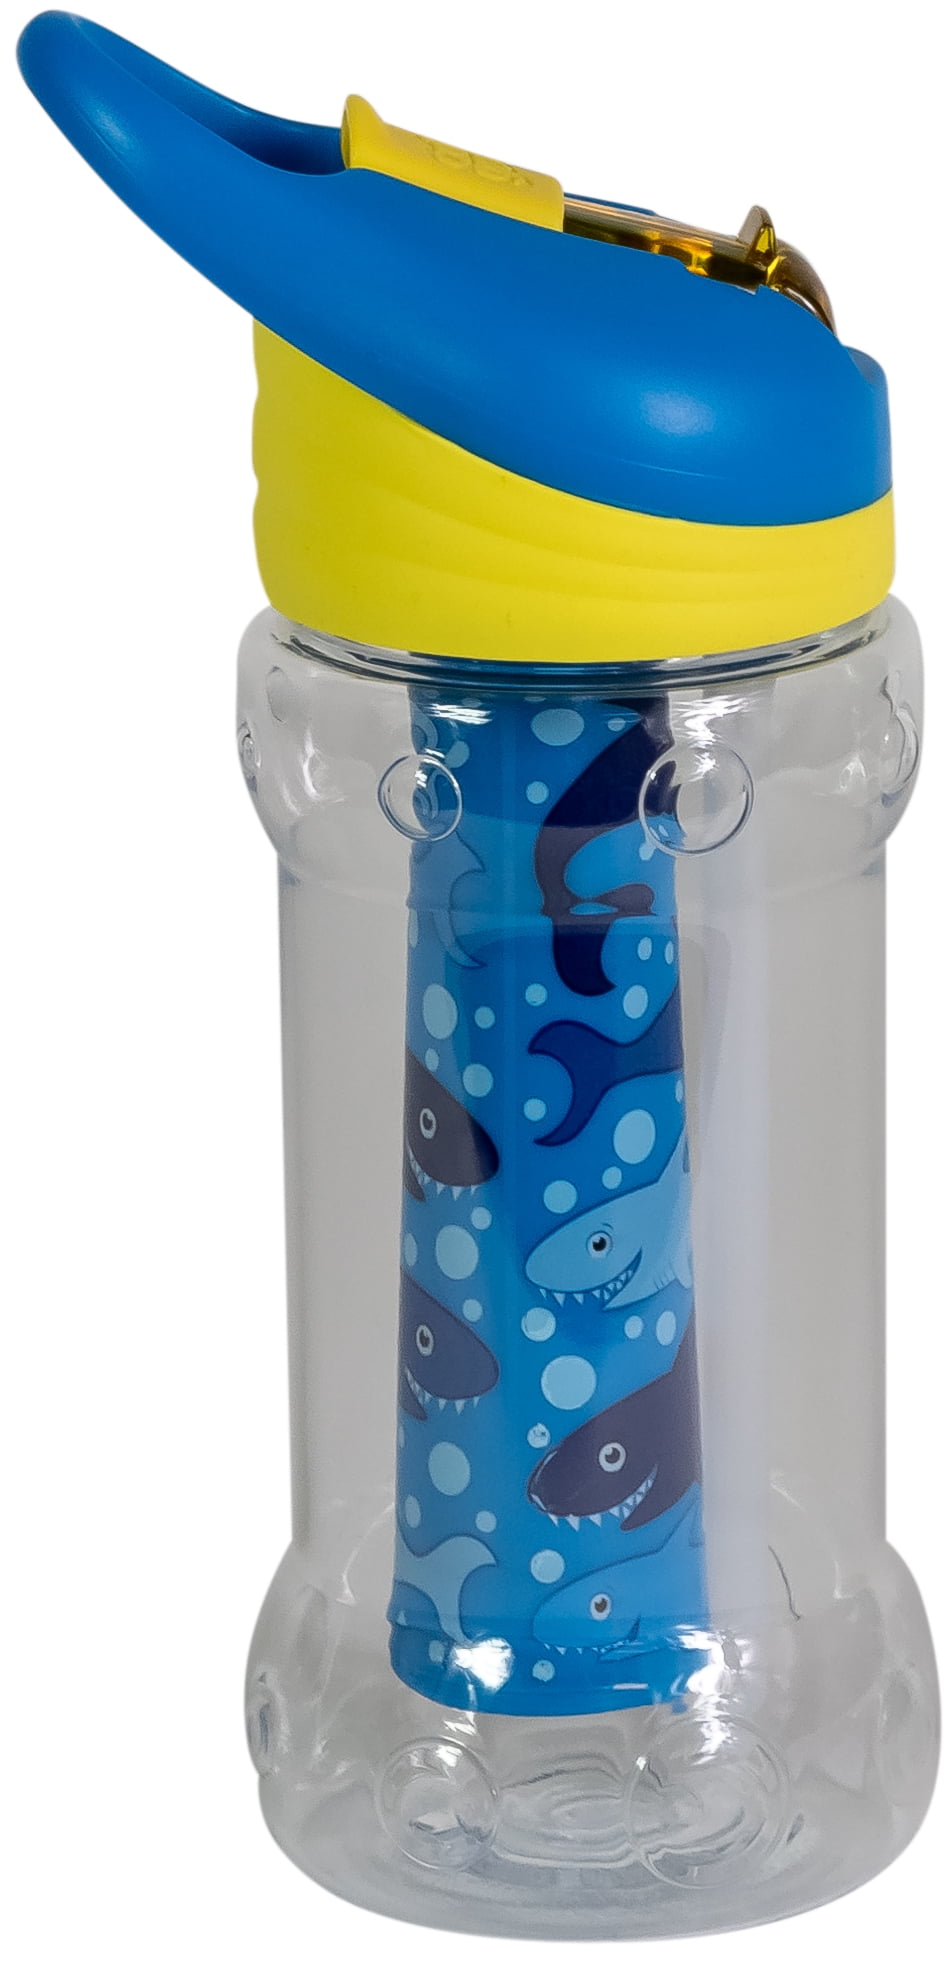 Cool Gear 14 Oz. non-toxic Paloma Bottle Shark, Blue and Yellow